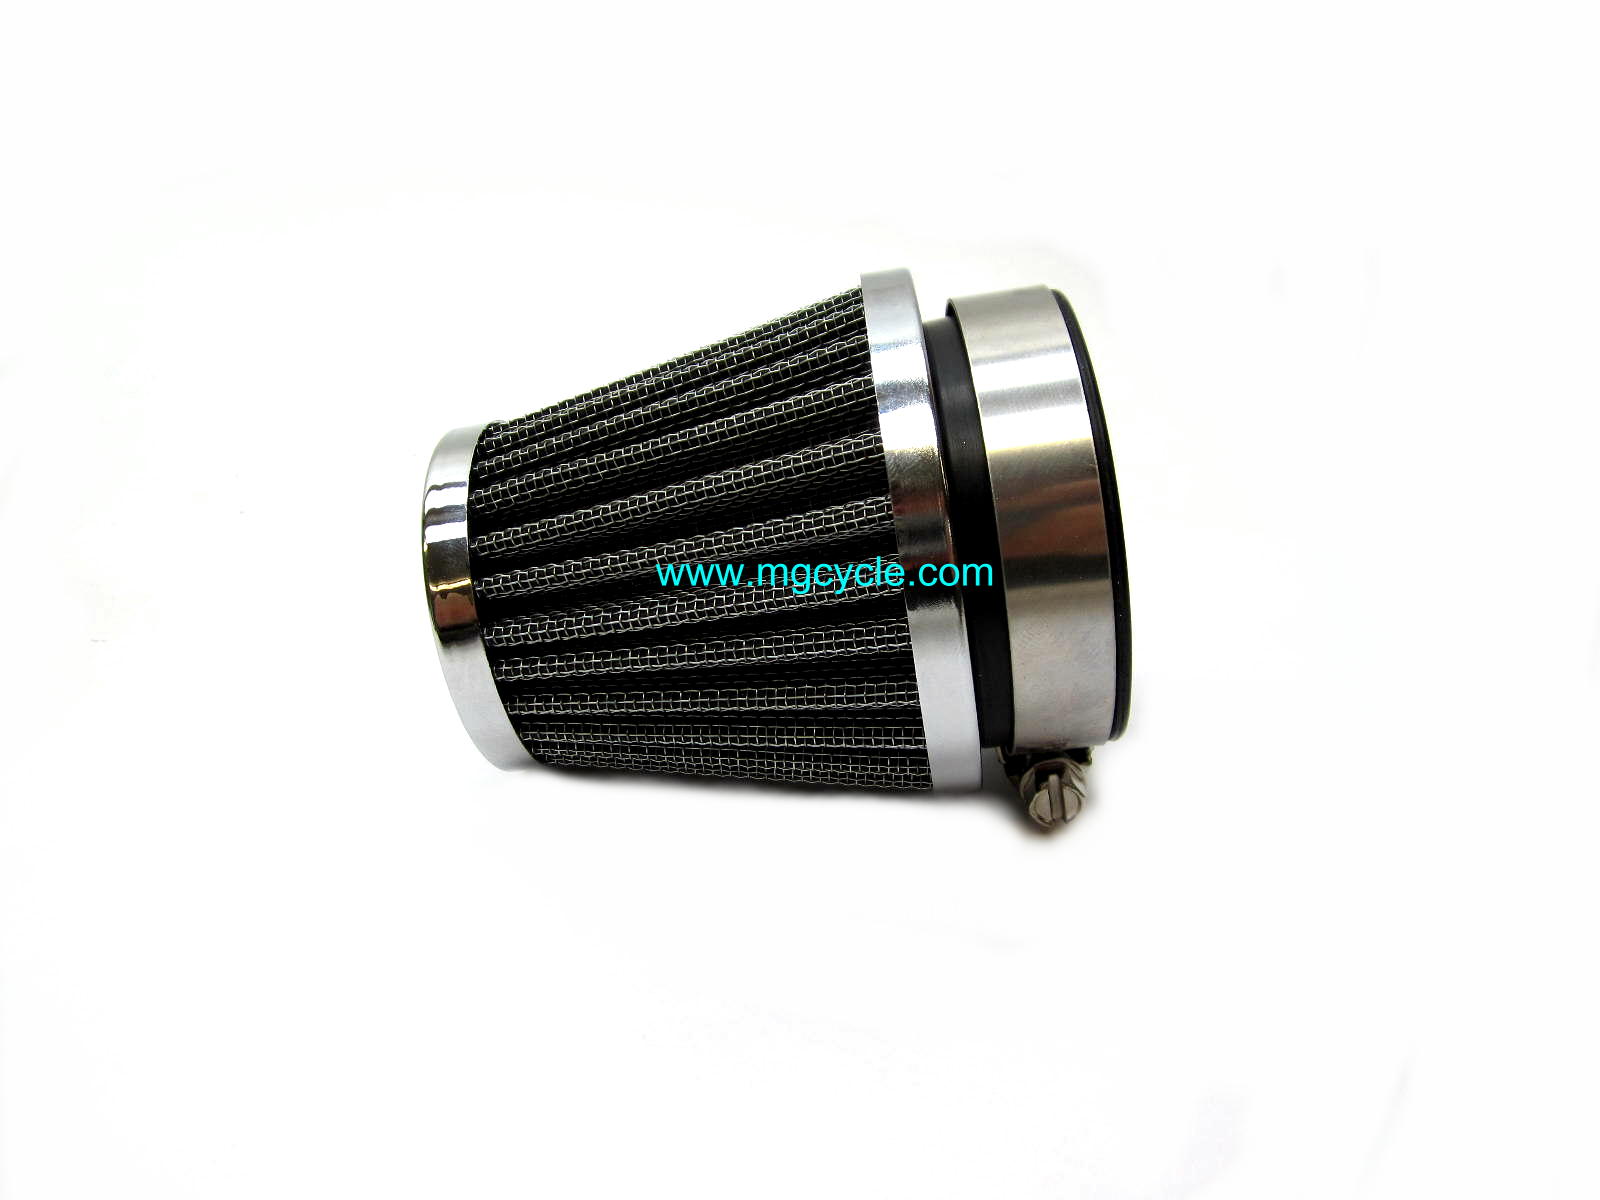 conical air filter pod for PHM38 and PHM40 carburetors